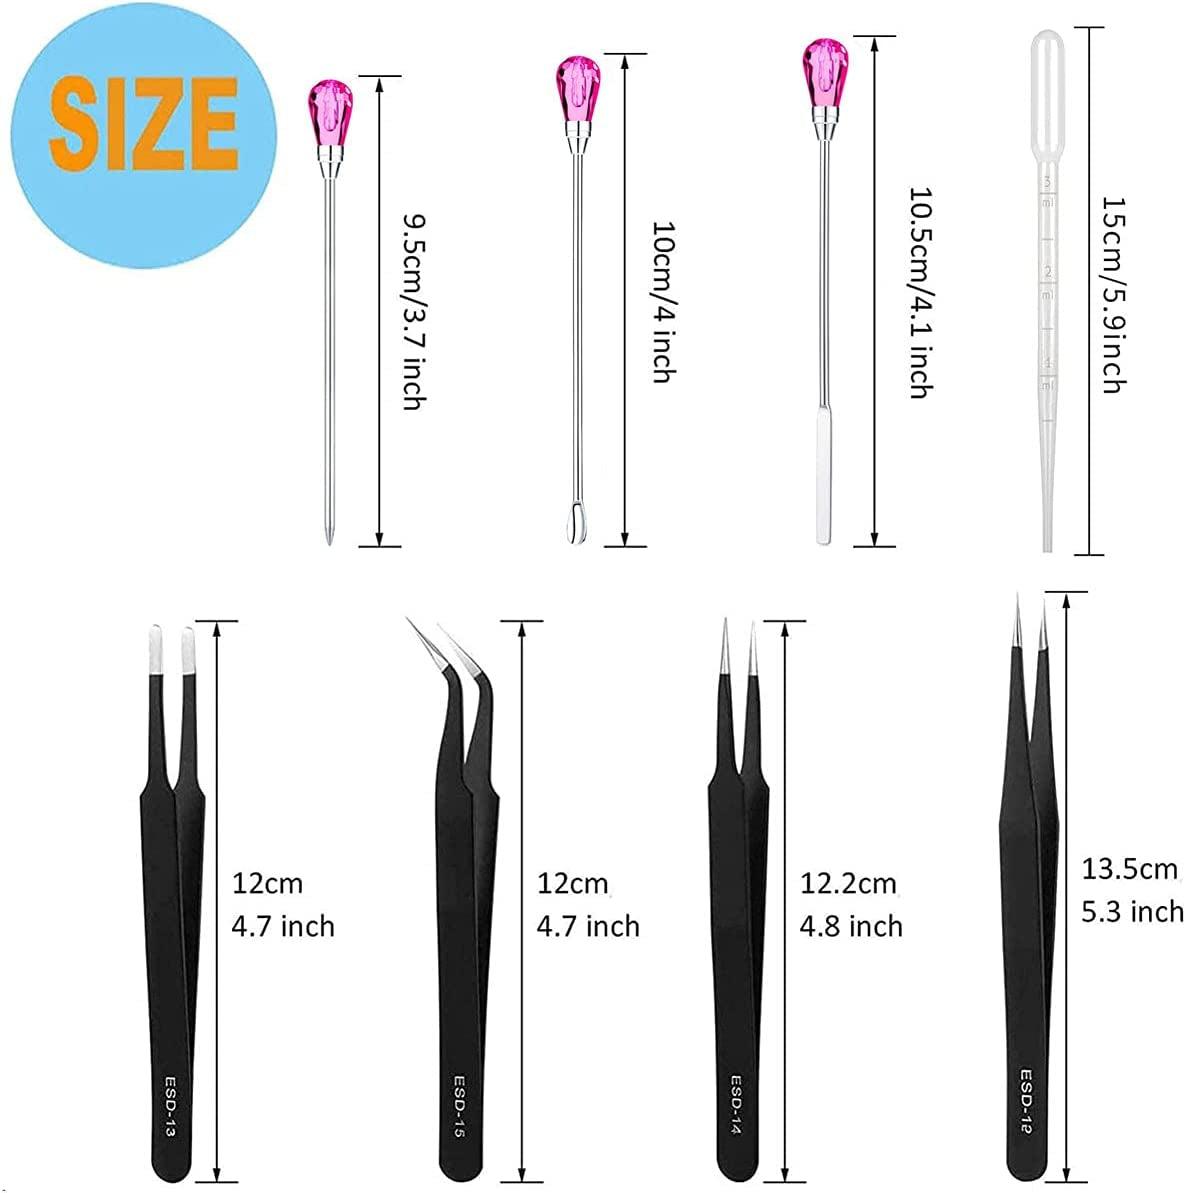 11 Pcs Silicone Resin Mold Tools Set Stirring Needle Spoon Tool Tweezers Precision Kit, Anti-Static Electronics Tweezers Set for Resin Art Crafts,Jewelry Making,Diy Epoxy Casting Molds(Rose Red) - WoodArtSupply